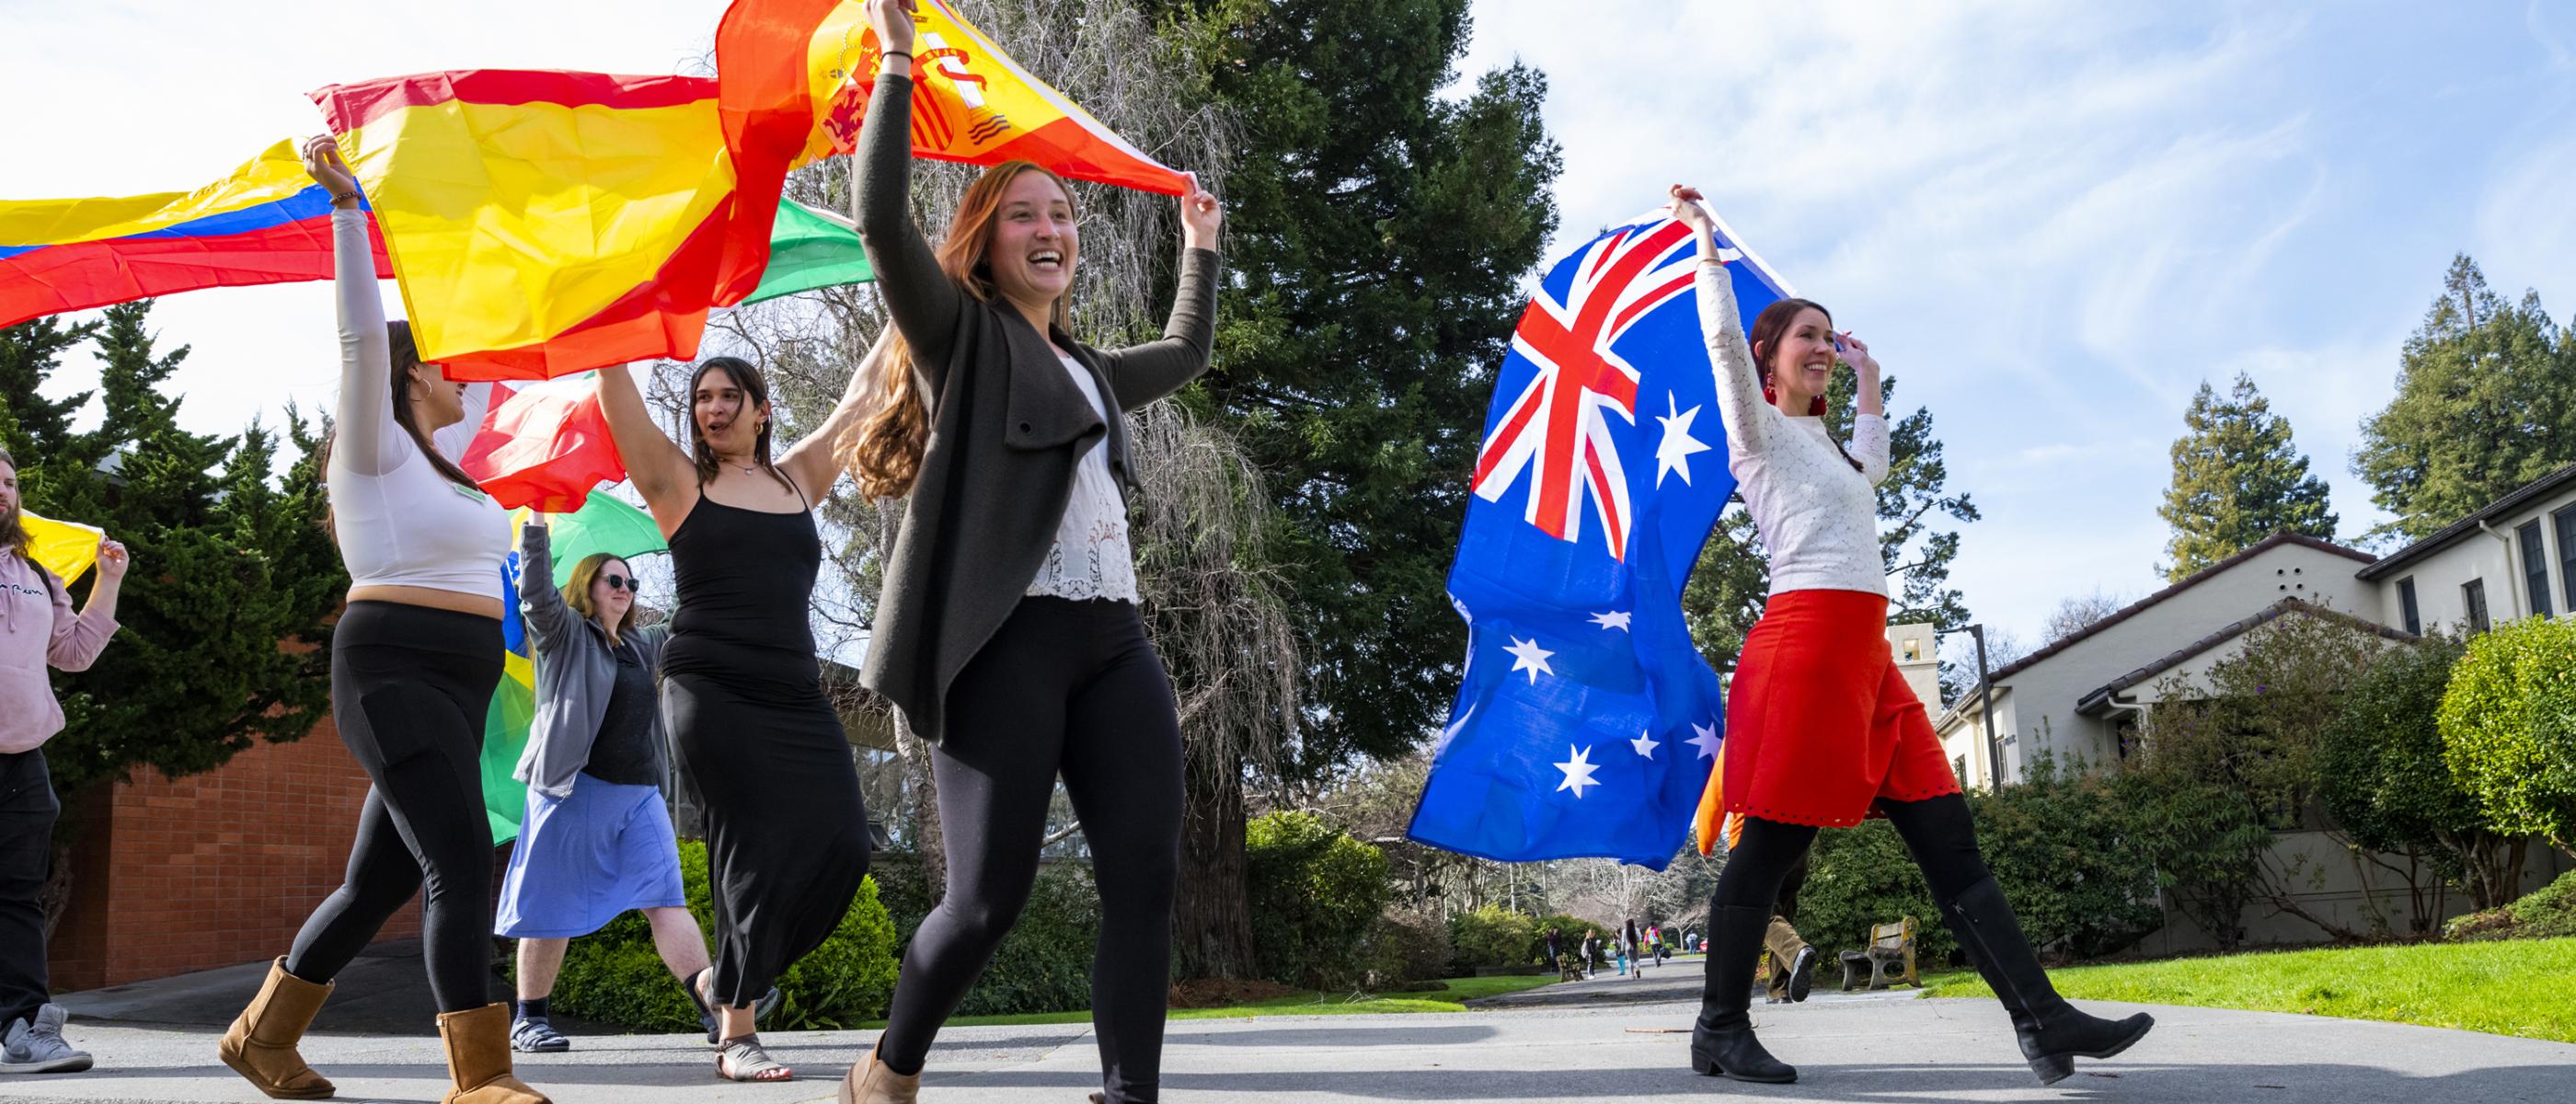 Cal Poly Humboldt International students carrying flags of their countries